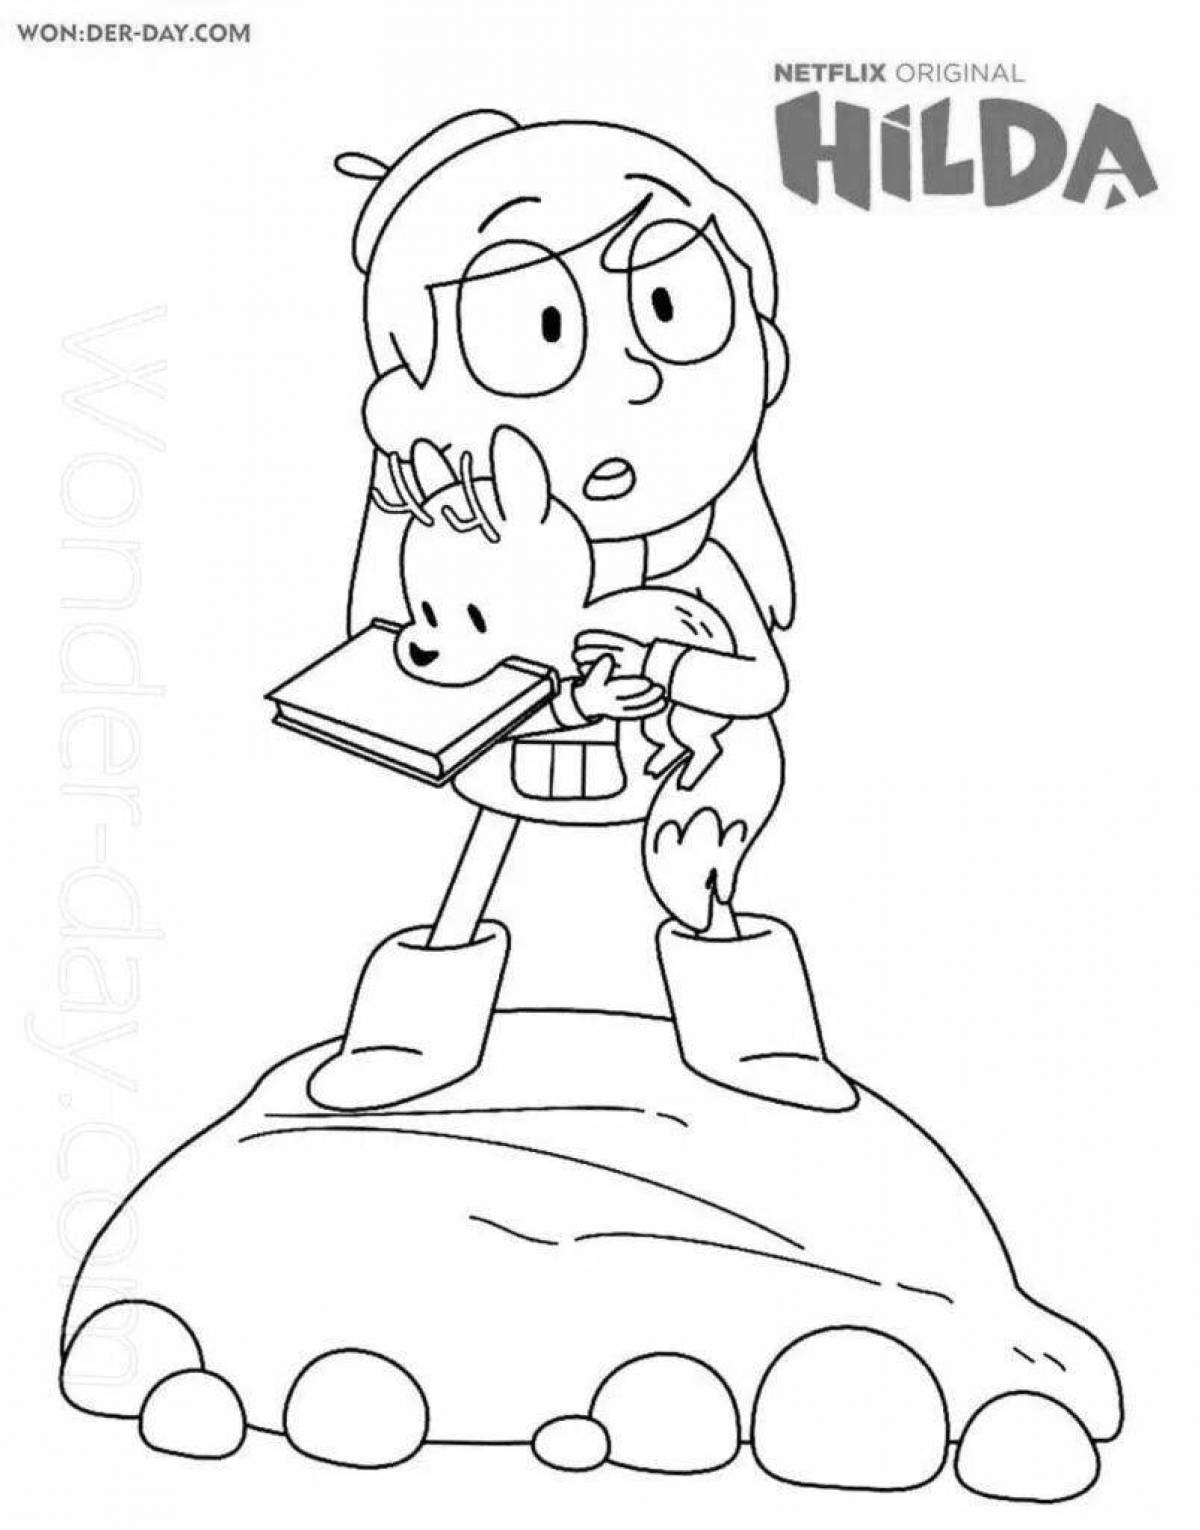 Hilda's amazing coloring page